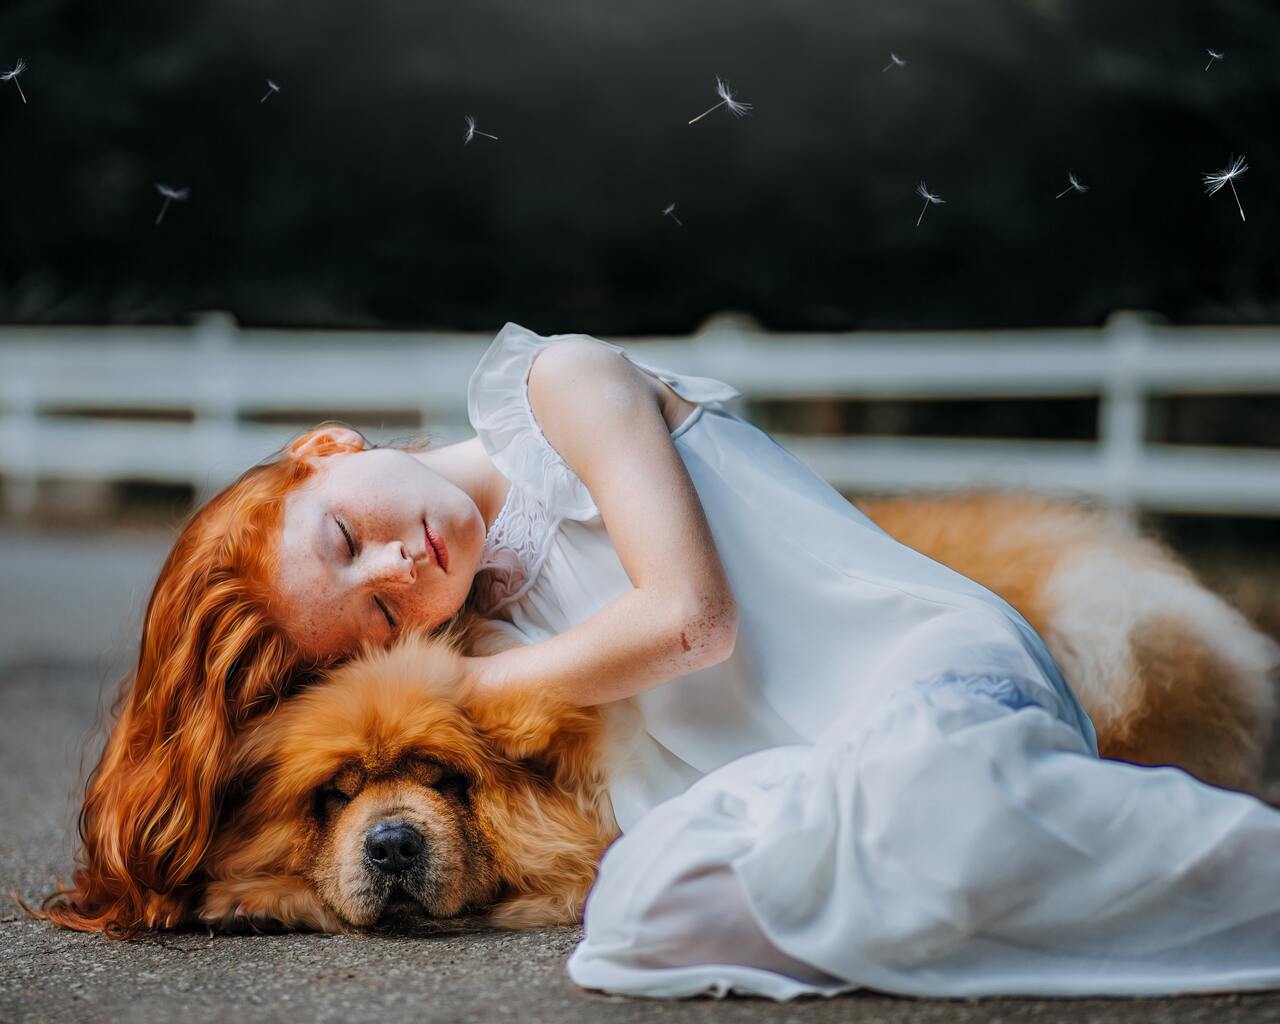 Girl And Dog Sleeping 5k Wallpaper In 1280x1024 Resolution